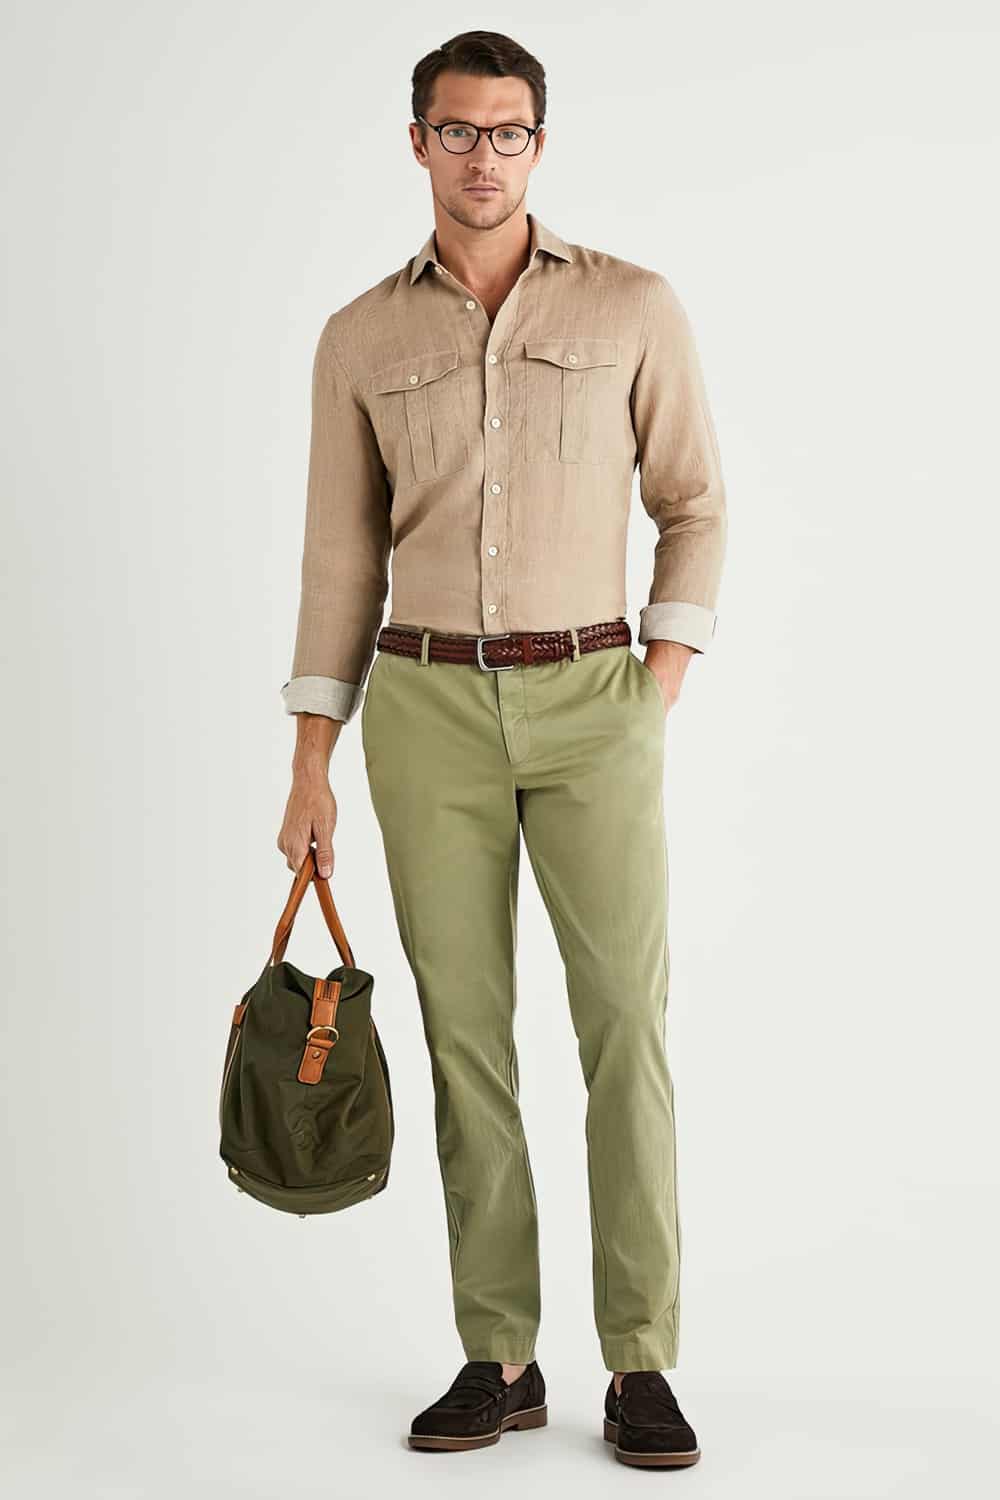 What Colour Shirts To Wear With Green Pants: 7 Foolproof Options